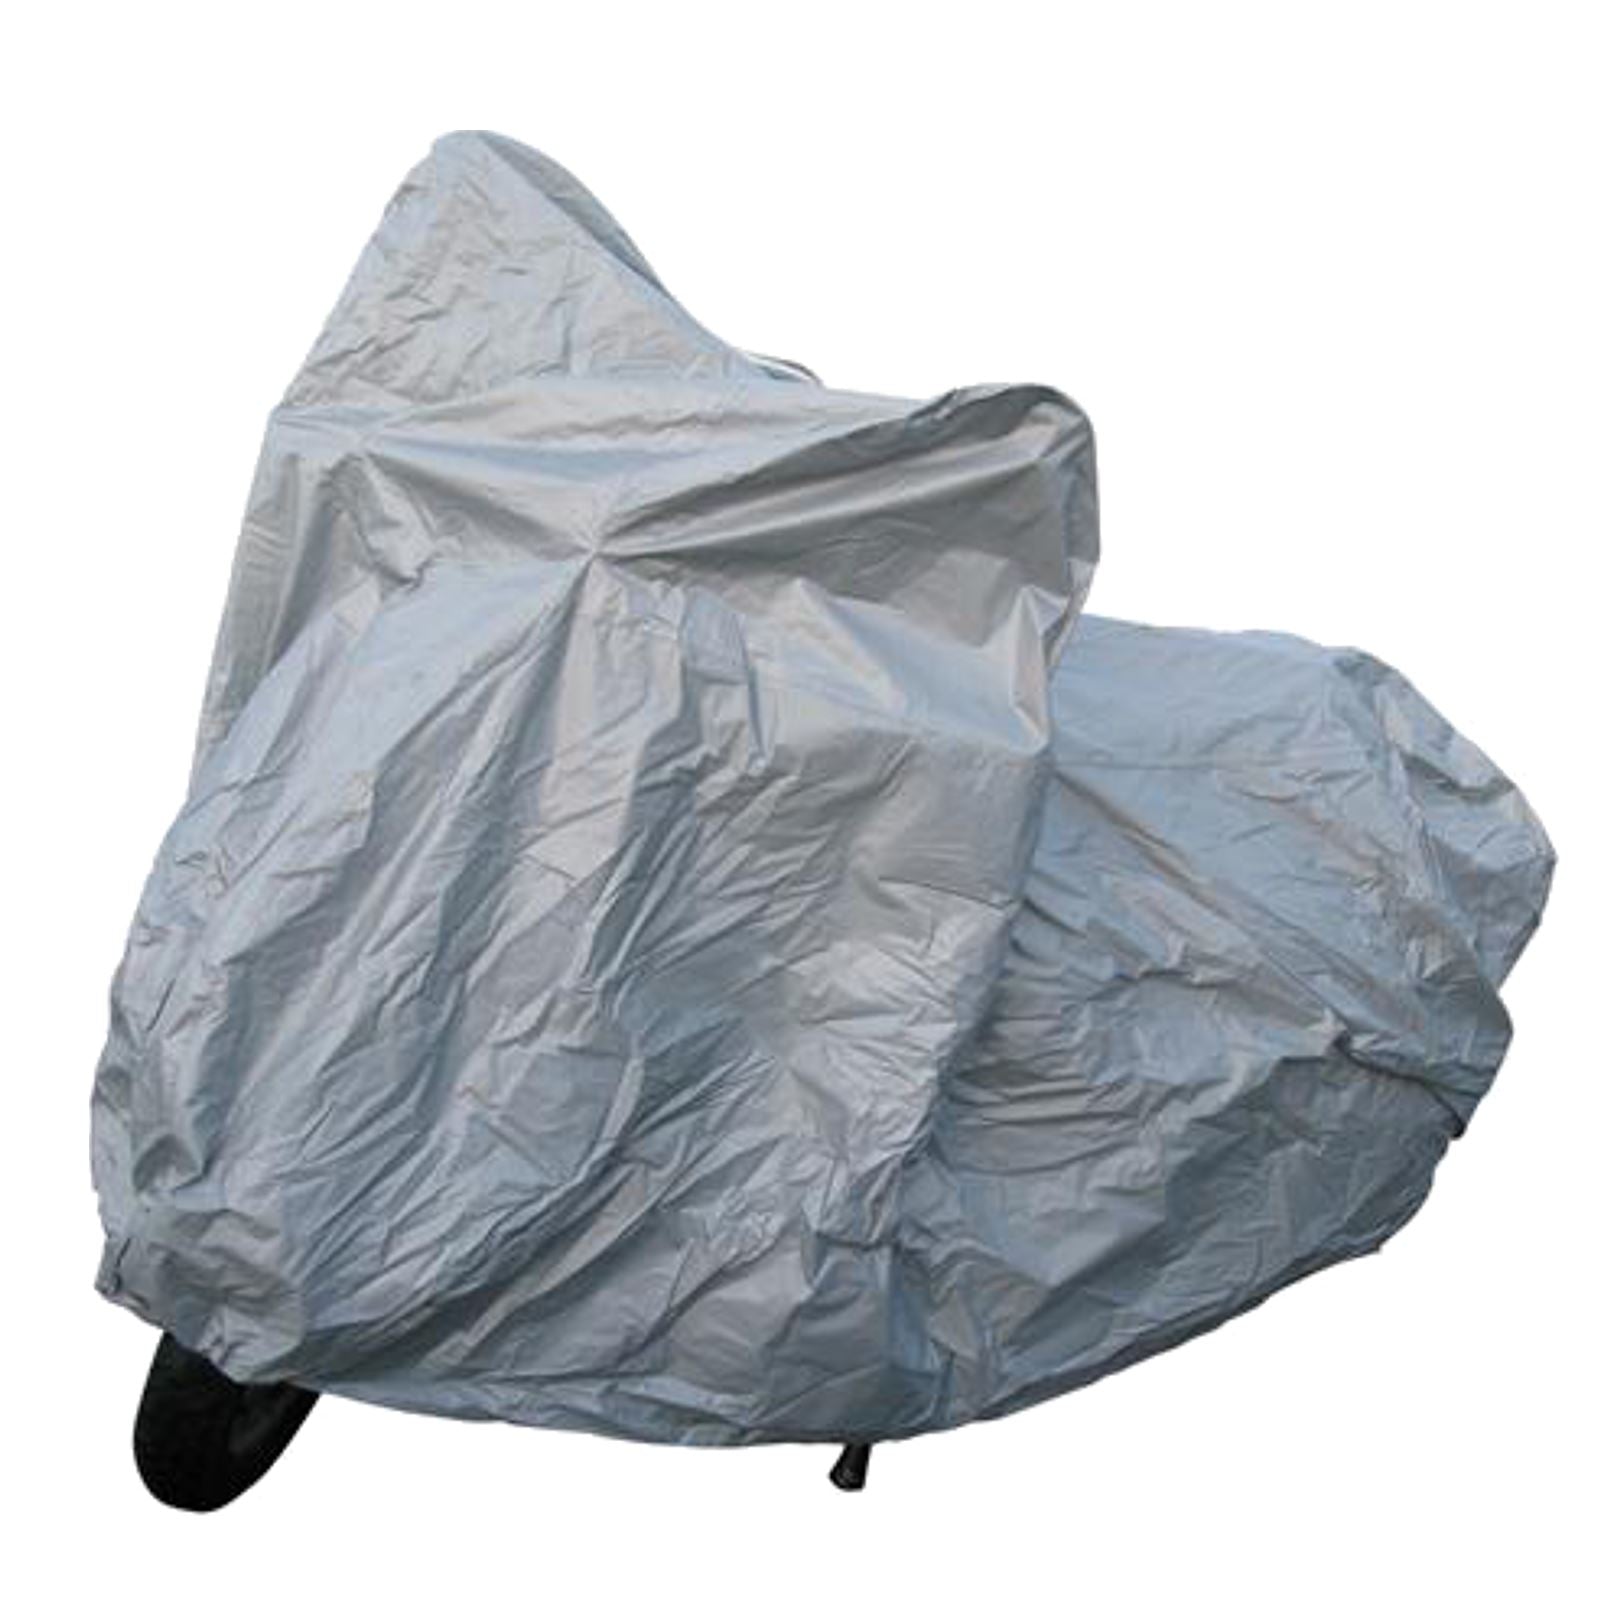 Motorbike Motorcycle Scooter Moped Bicycle cover 2300mm x 870mm x 1050mm Sil100